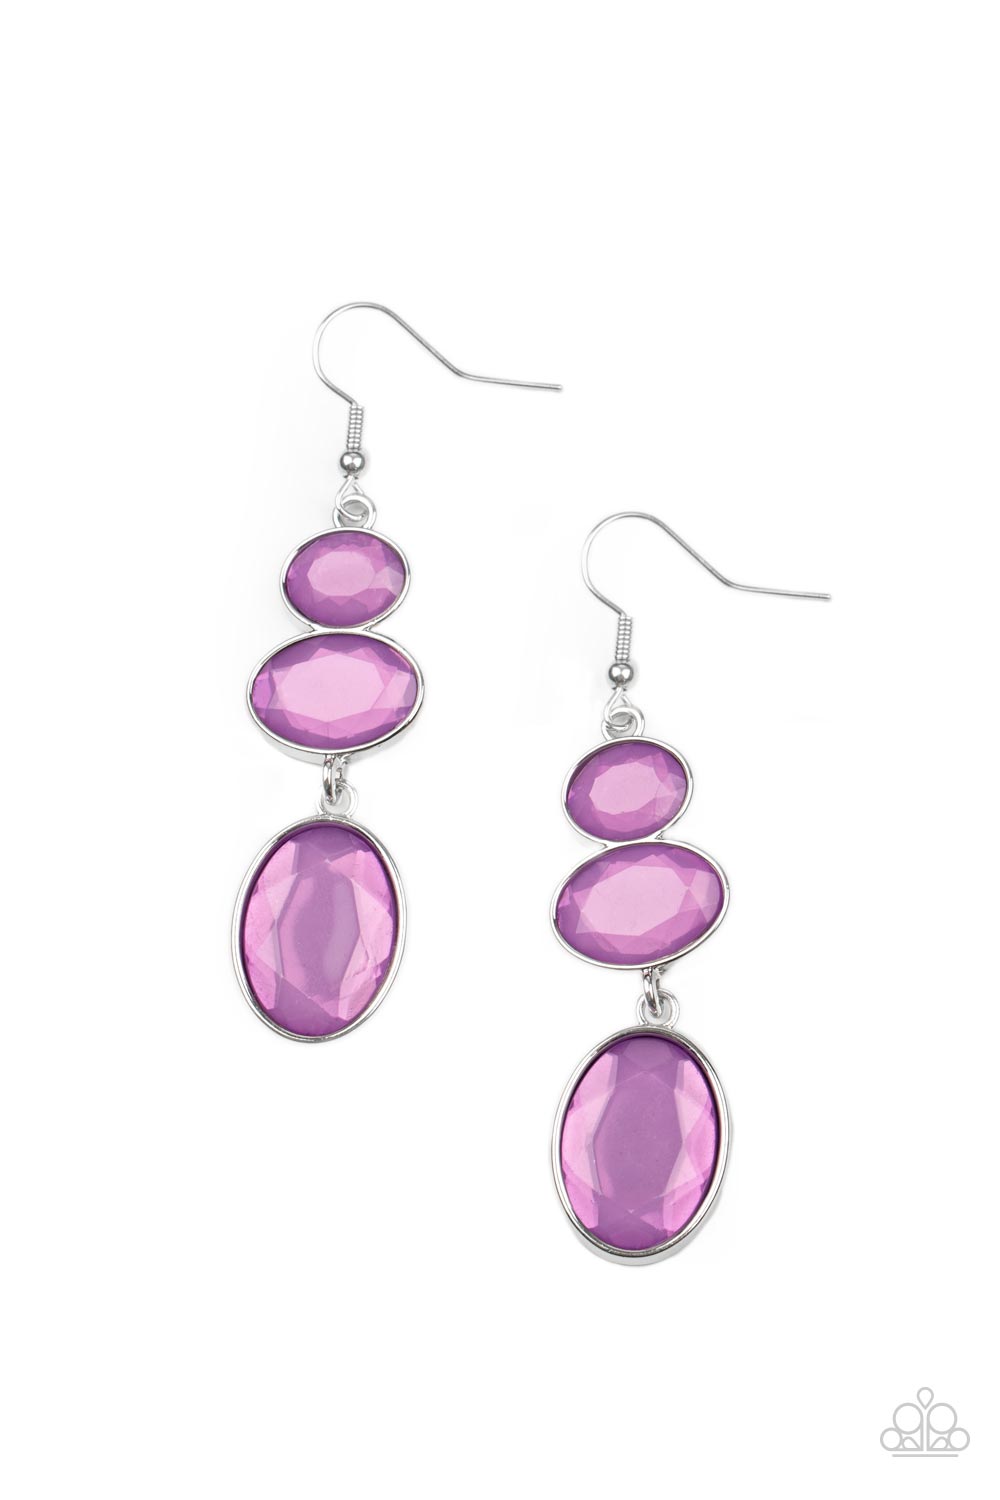 Tiers Of Tranquility Purple Earring - Paparazzi Accessories  Gradually increasing in size, dewy Amethyst Orchid oval gems trickle from the ear, linking into an ethereal lure. Earring attaches to a standard fishhook fitting.  All Paparazzi Accessories are lead free and nickel free!  Sold as one pair of earrings.